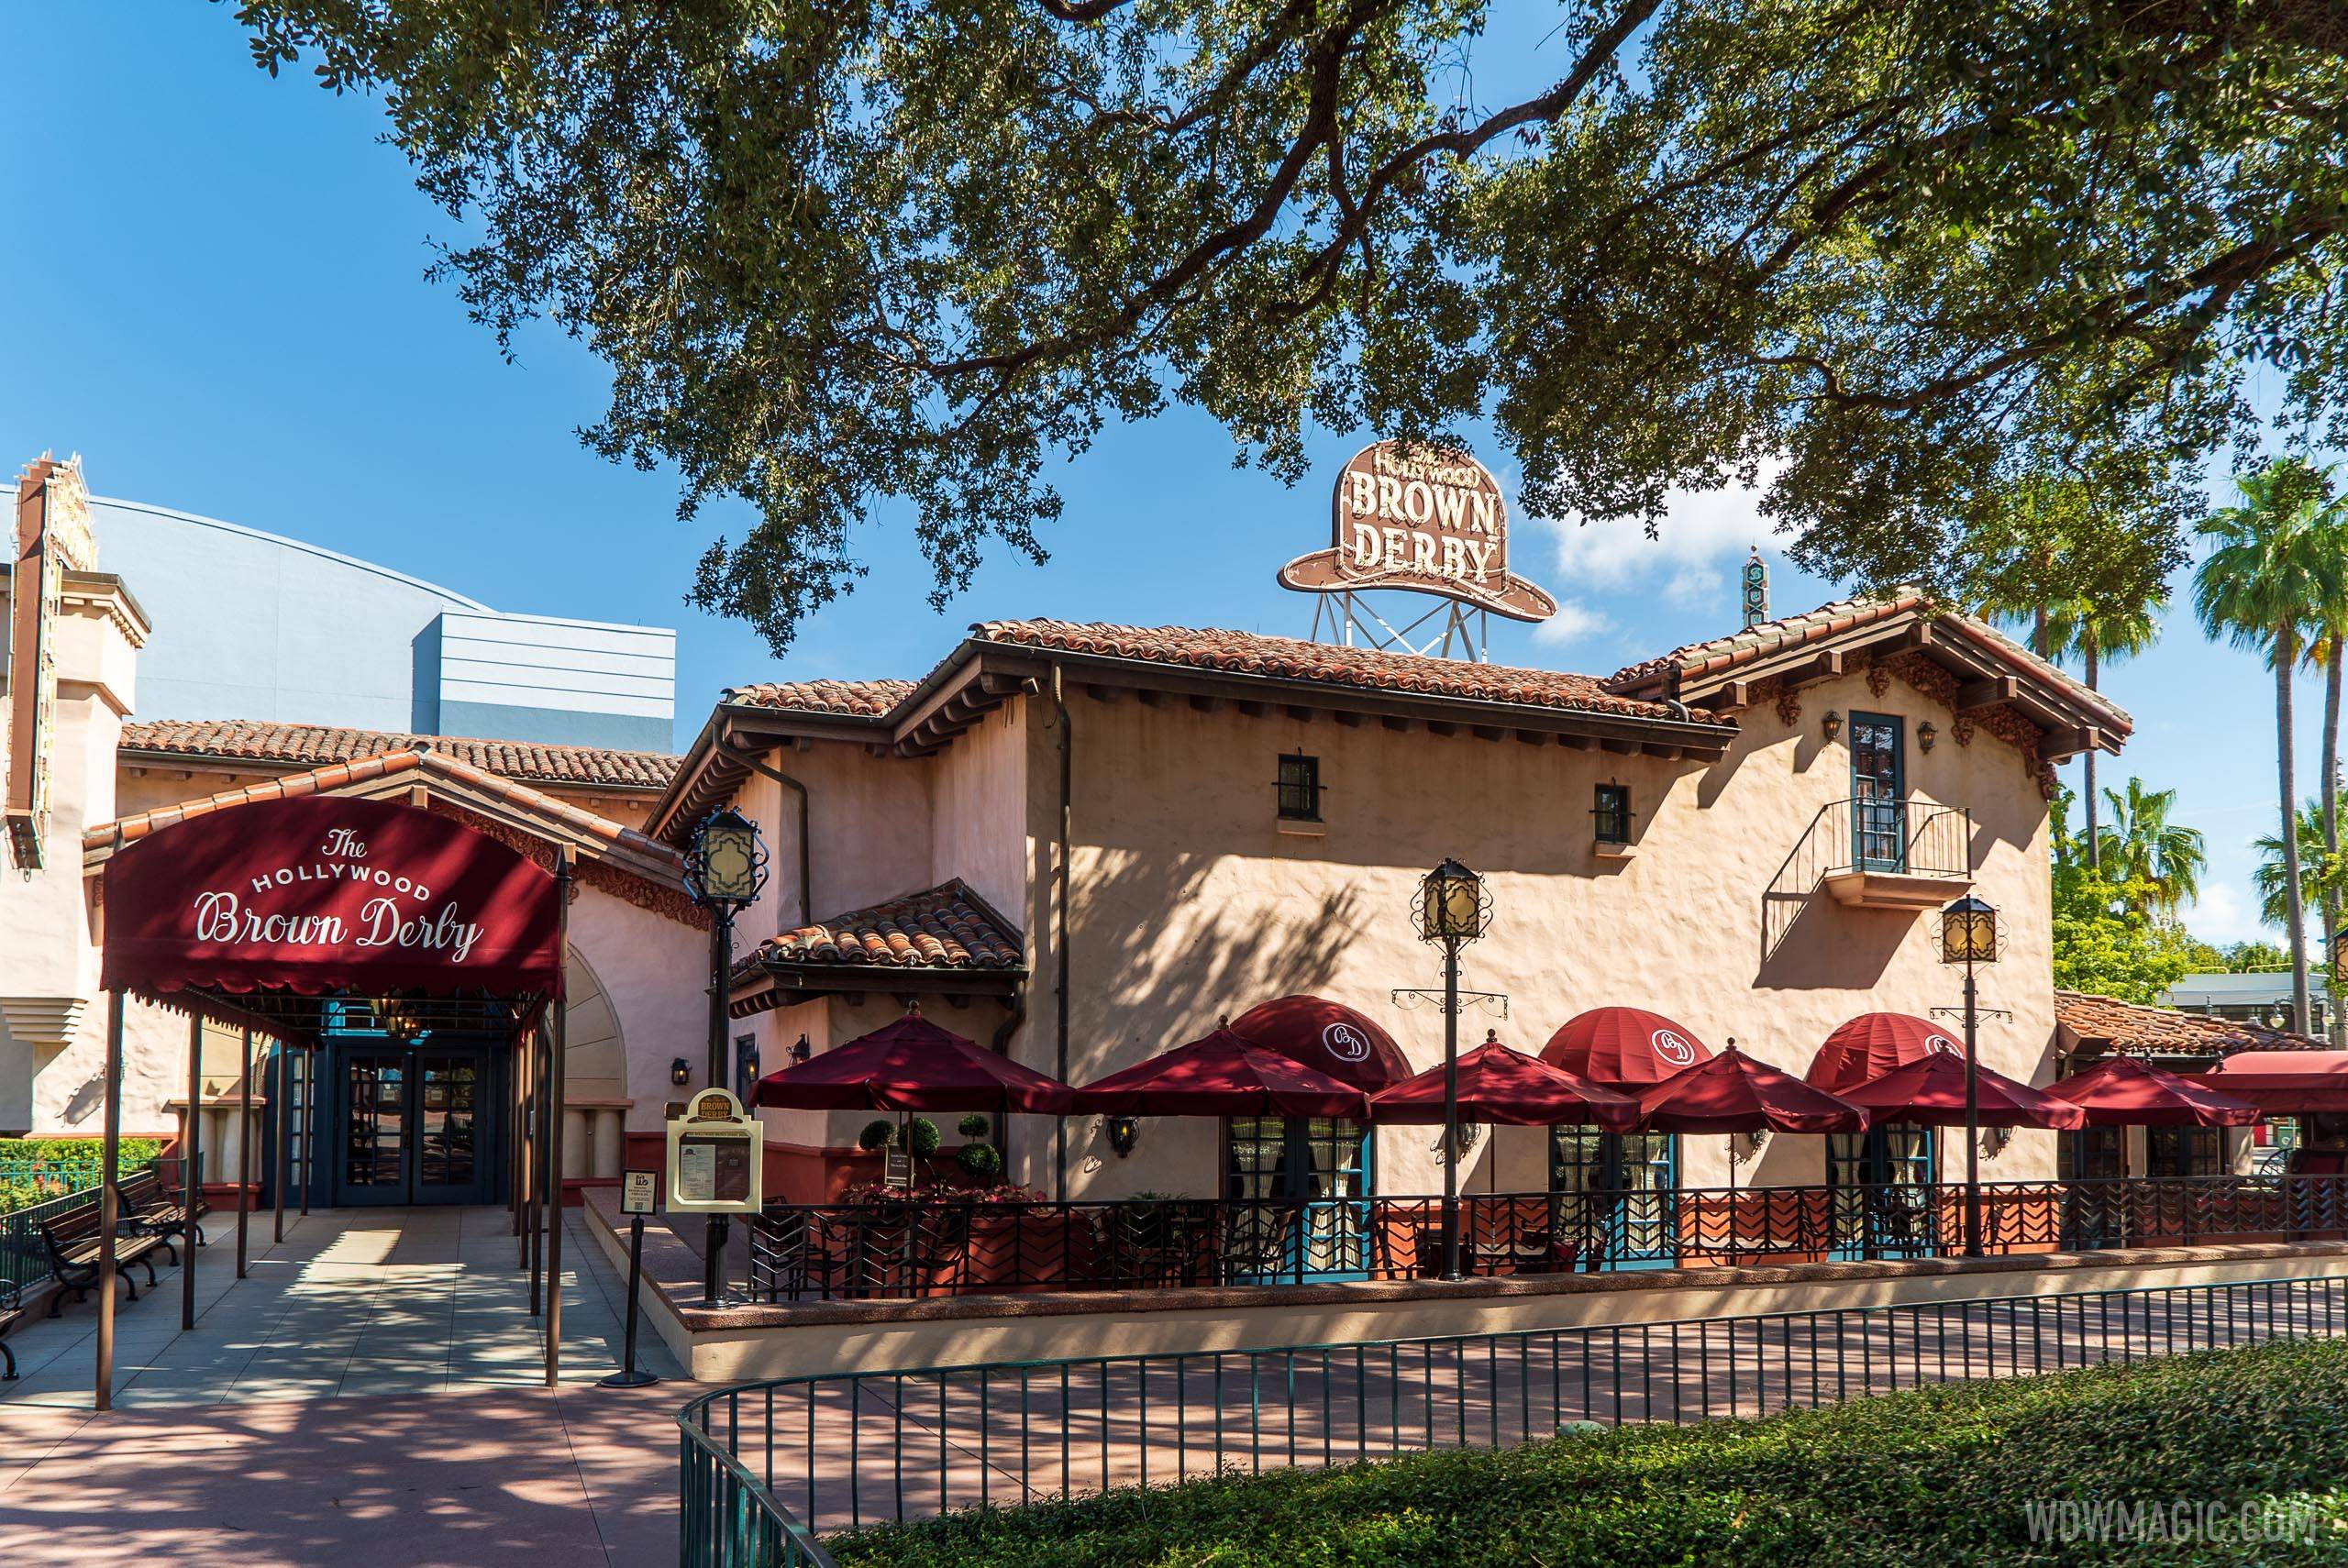 The Hollywood Brown Derby will be part of the walk-up wait list program